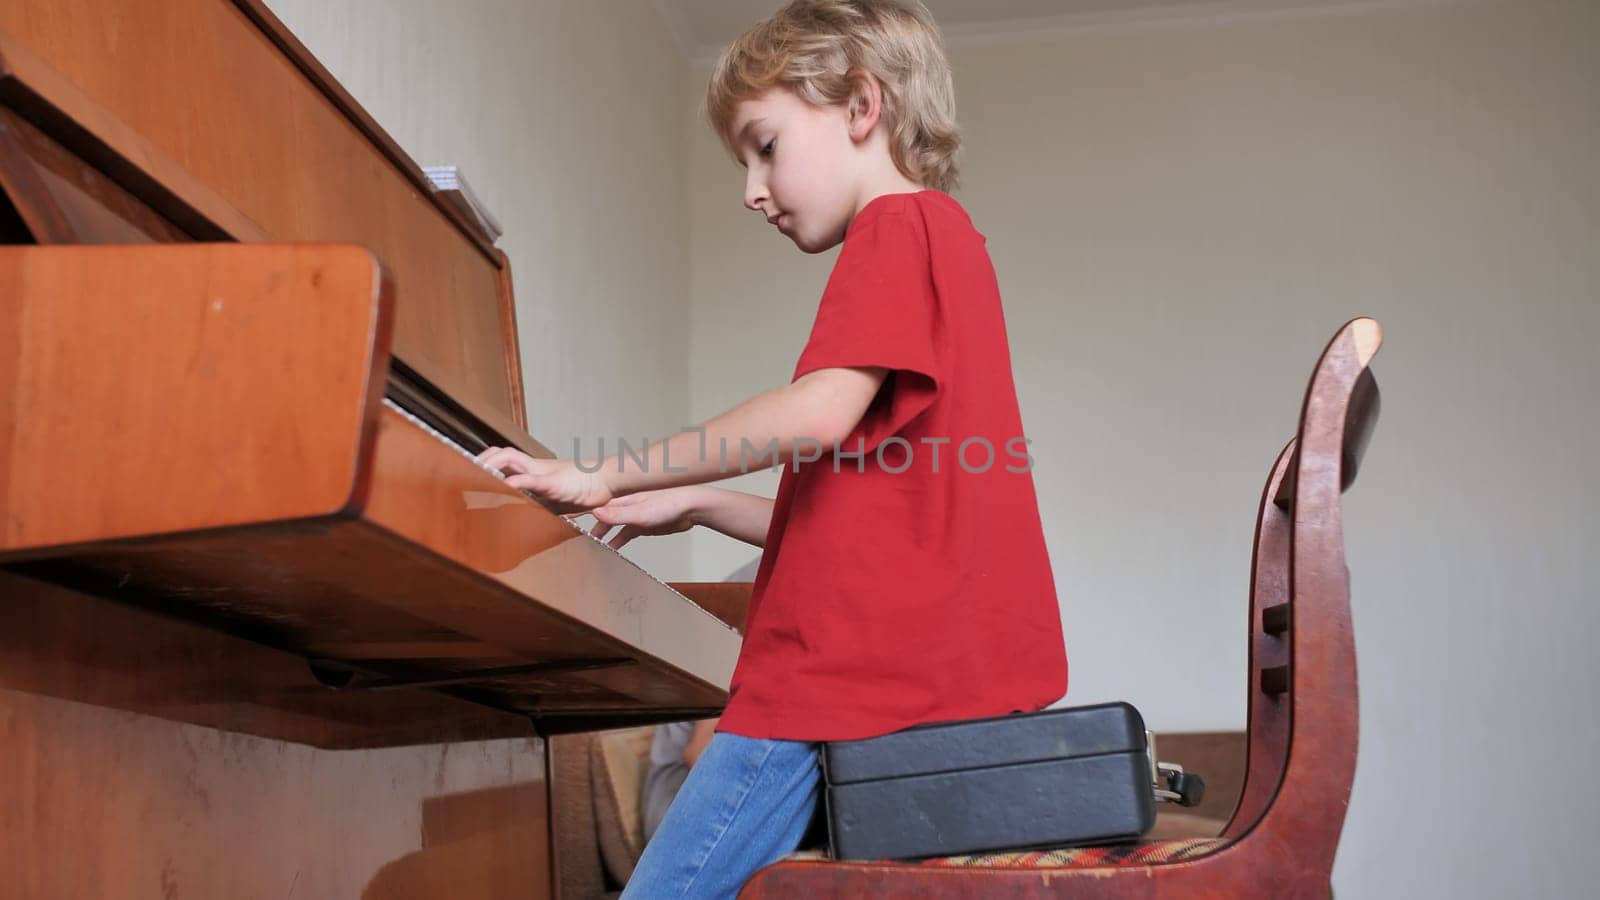 An eight-year-old boy plays the piano at home